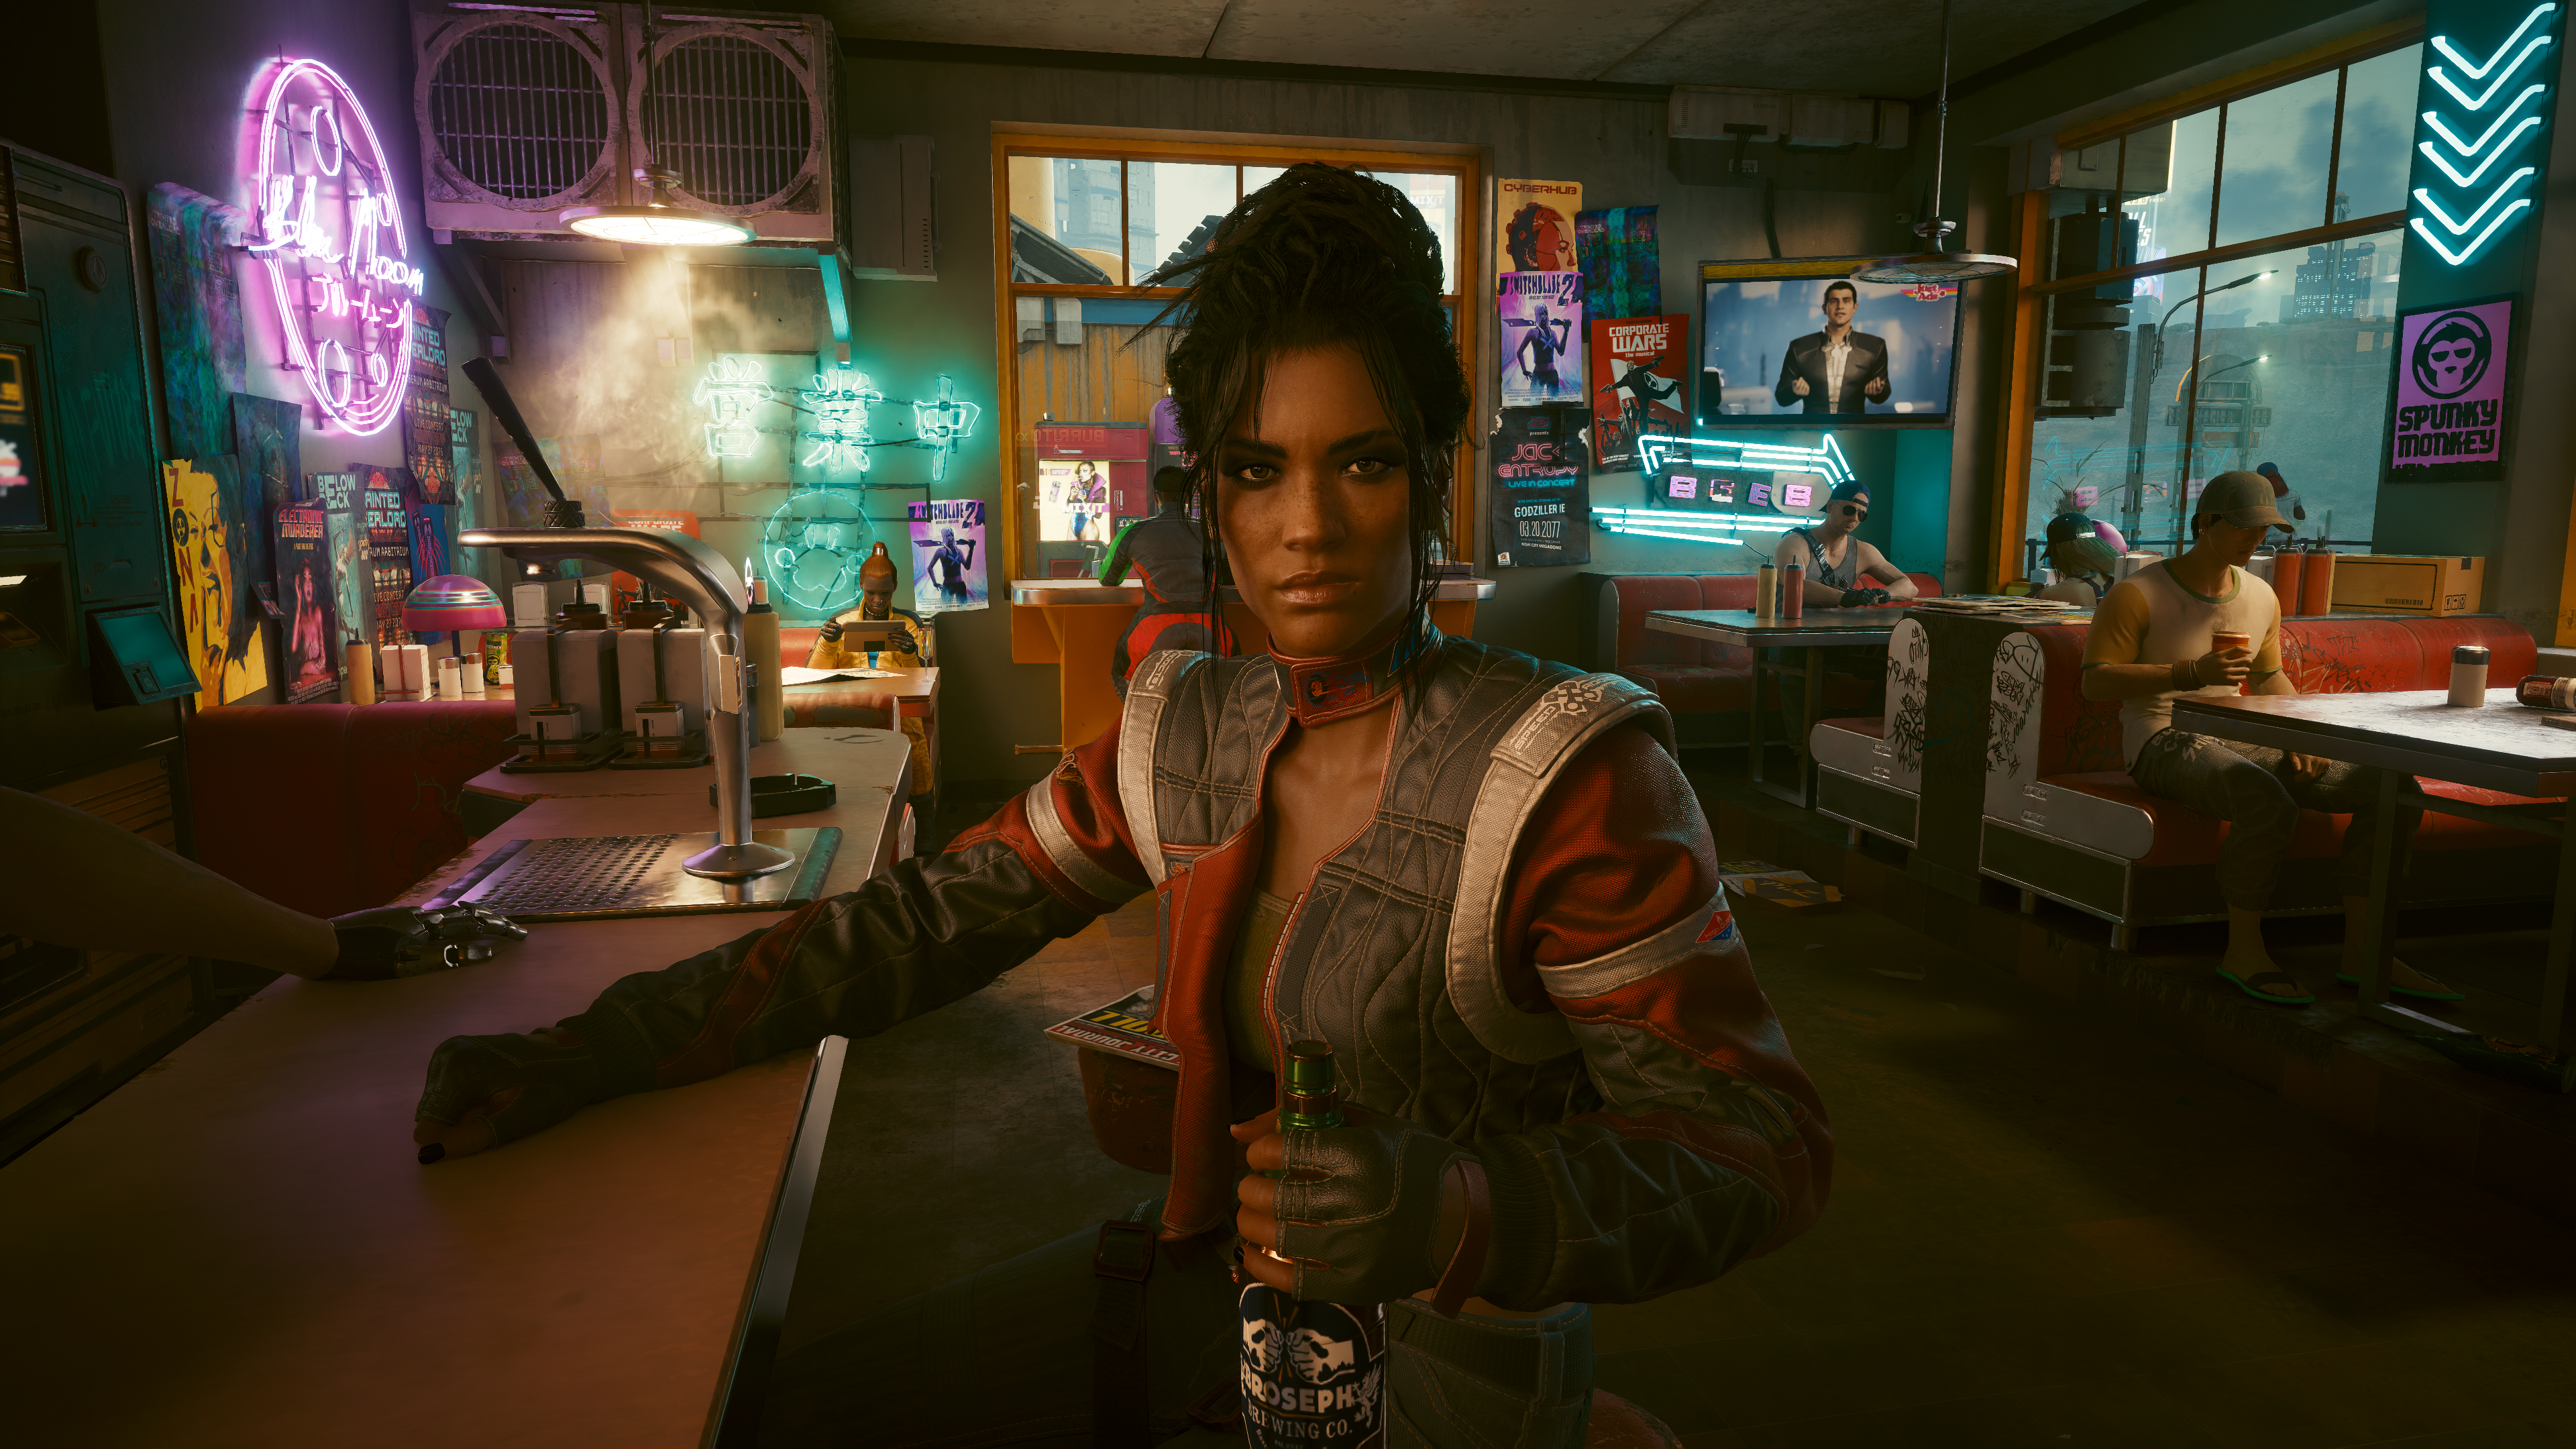 General 3840x2160 cyberpunk 2077 Panam Palmer Cyberpunk 2077 sitting video game characters CGI video game art screen shot video game girls bottles glass bottle Panam Palmer digital art short hair looking at viewer bar neon jacket drink video games closed mouth black nails painted nails sign TV poster POV